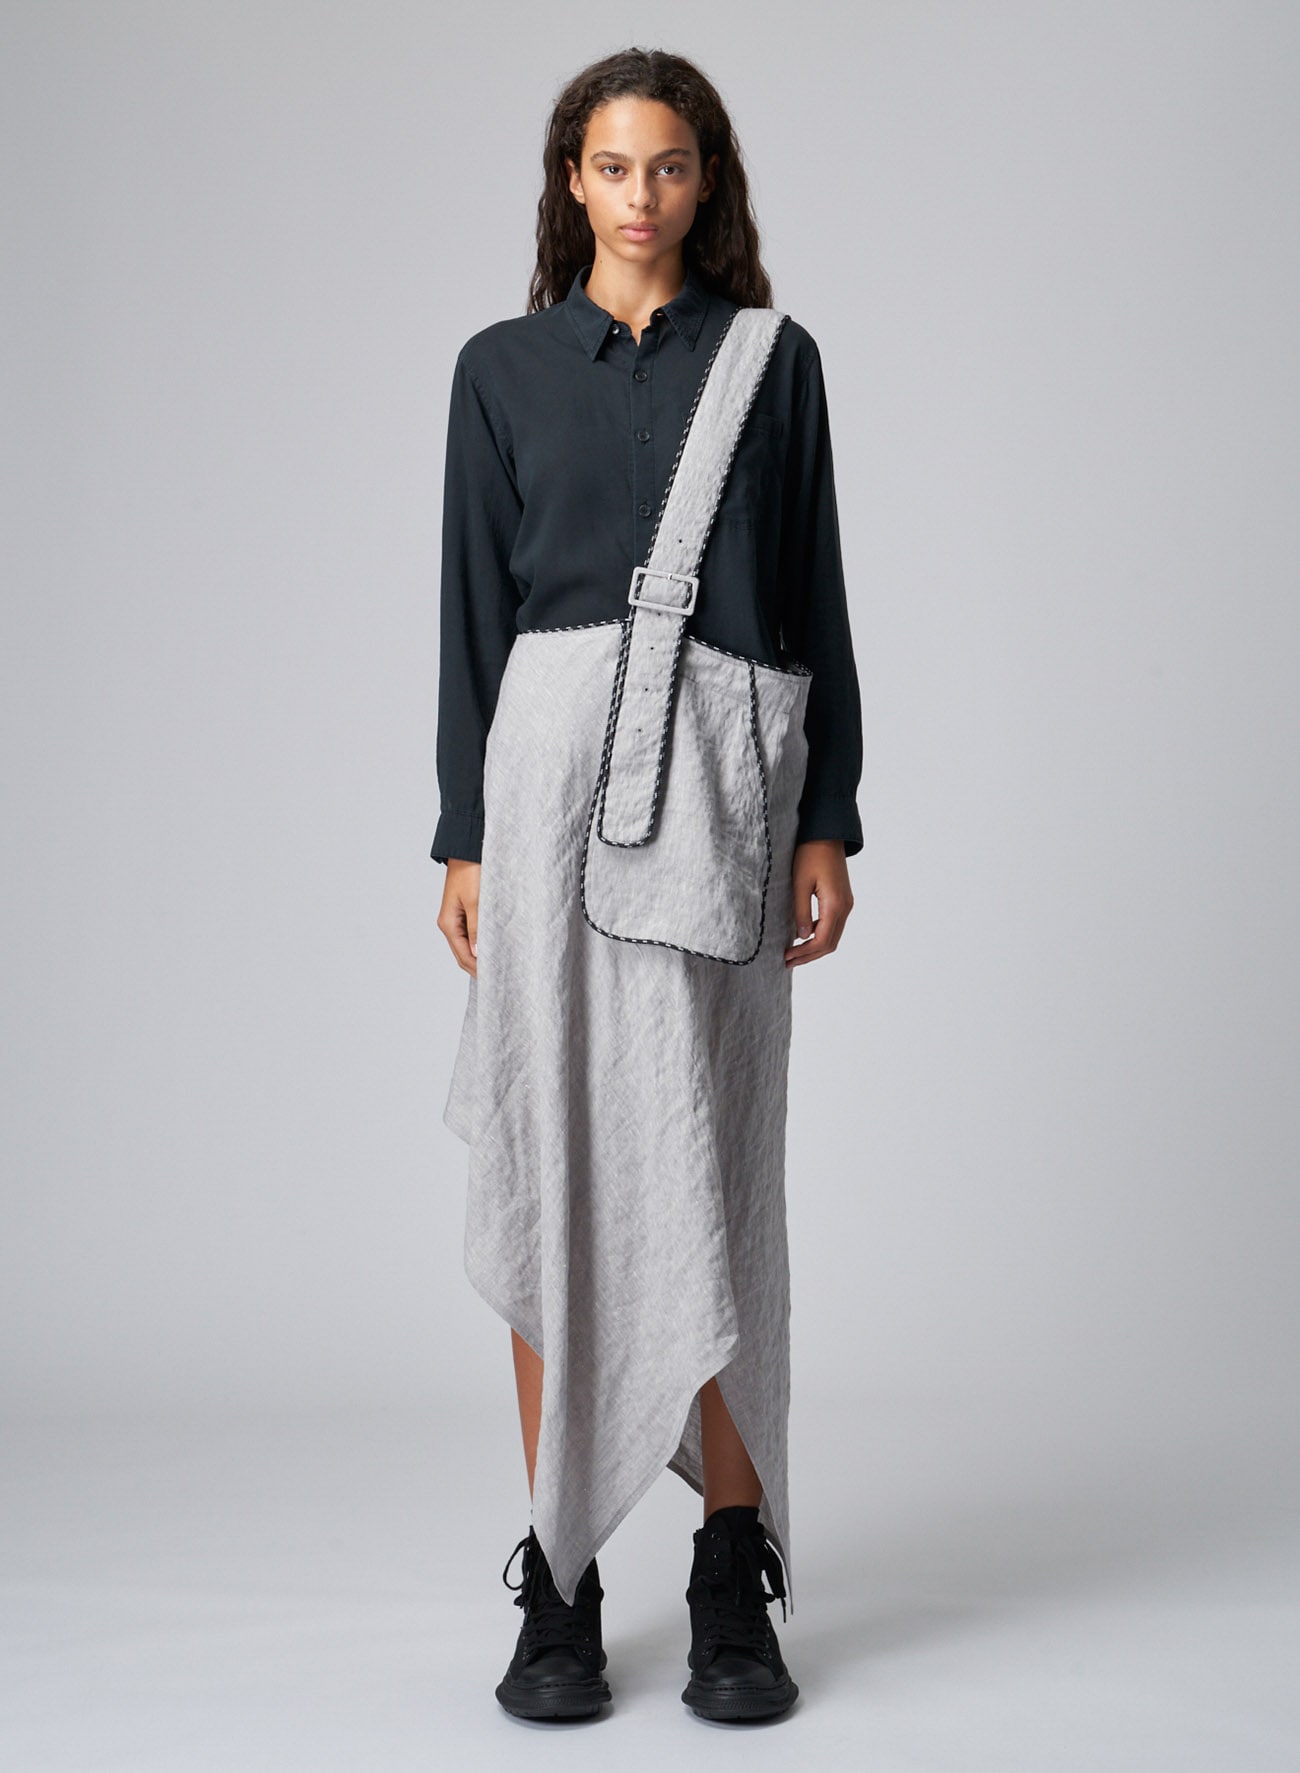 BREATHABLE LINEN/RAYON ASYMMETRIC SKIRT WITH SHOULDER STRAP